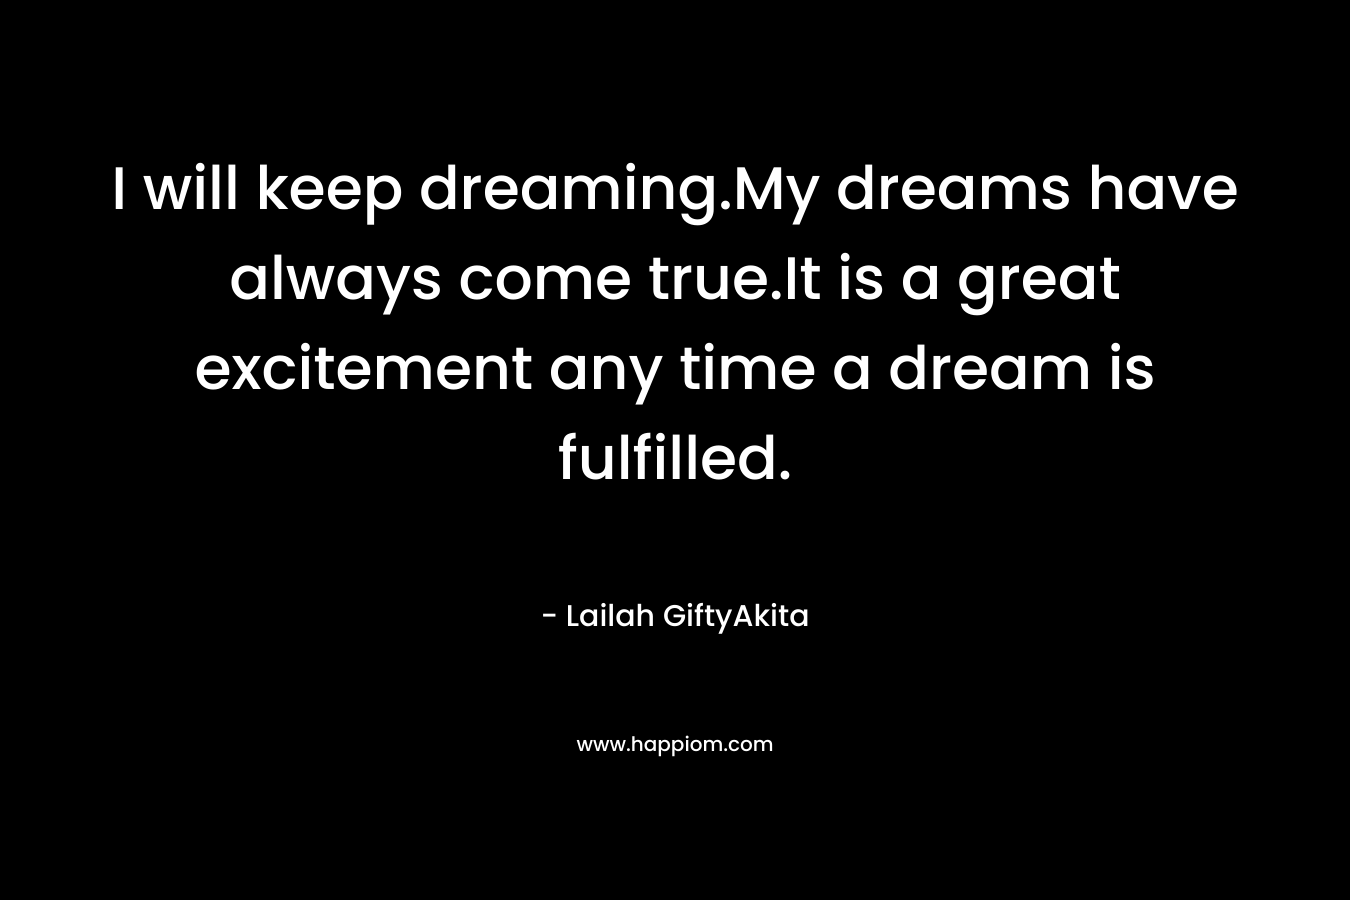 I will keep dreaming.My dreams have always come true.It is a great excitement any time a dream is fulfilled.